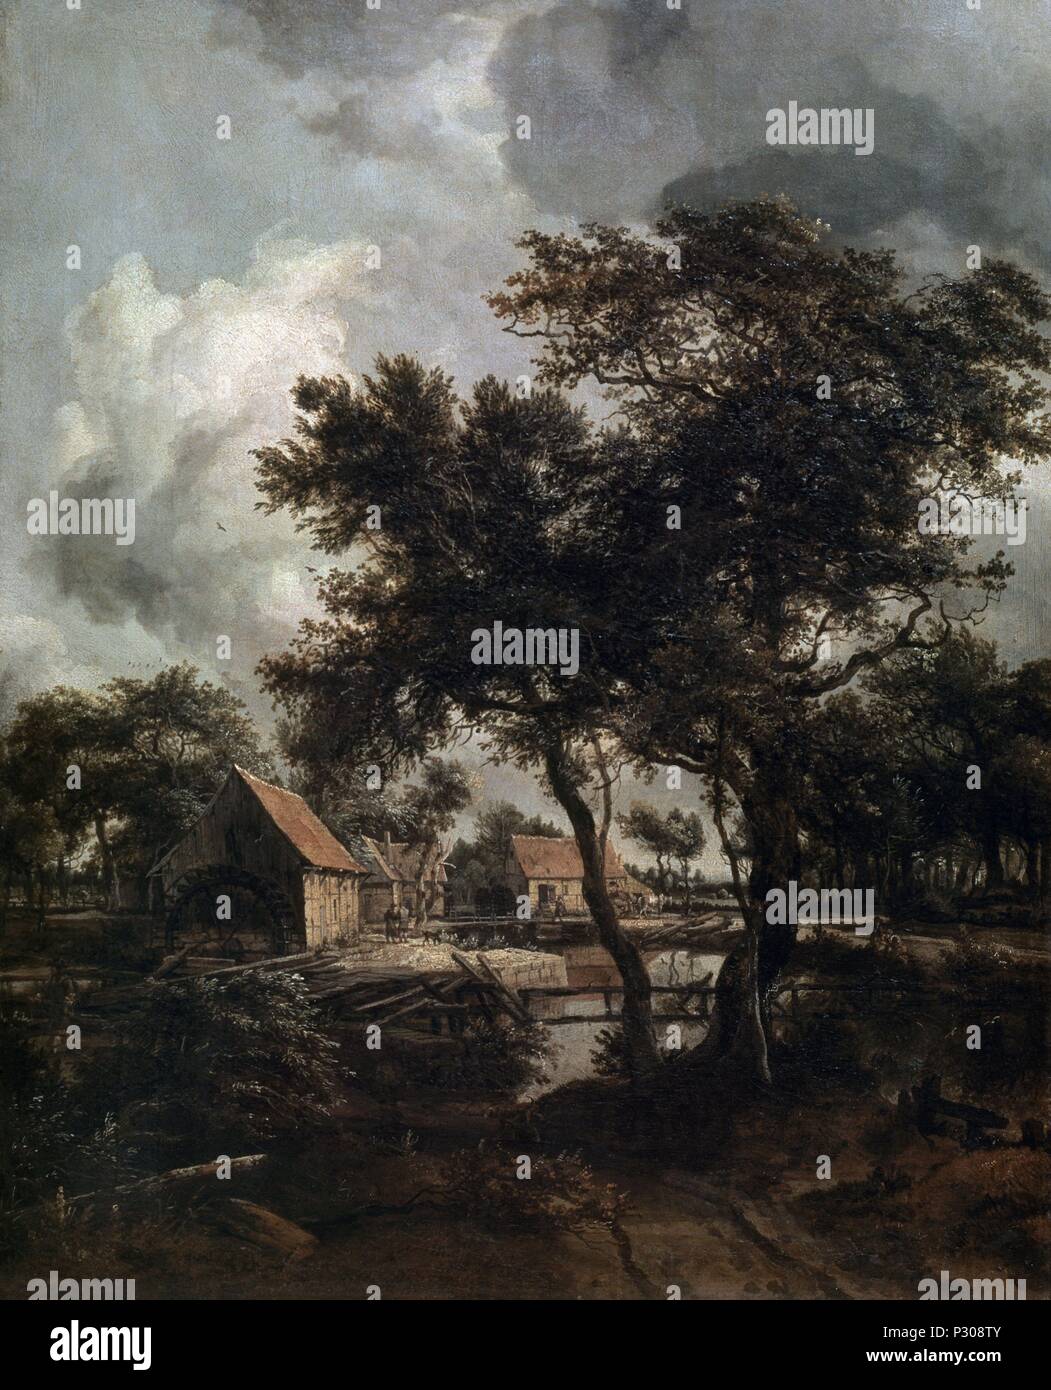 The Watermill - ca.1660 - 80x66 cm - oil on canvas - Dutch Baroque. Author: Meindert Hobbema (1638-1709). Location: LOUVRE MUSEUM-PAINTINGS, FRANCE. Also known as: EL MOLINO DE AGUA. Stock Photo